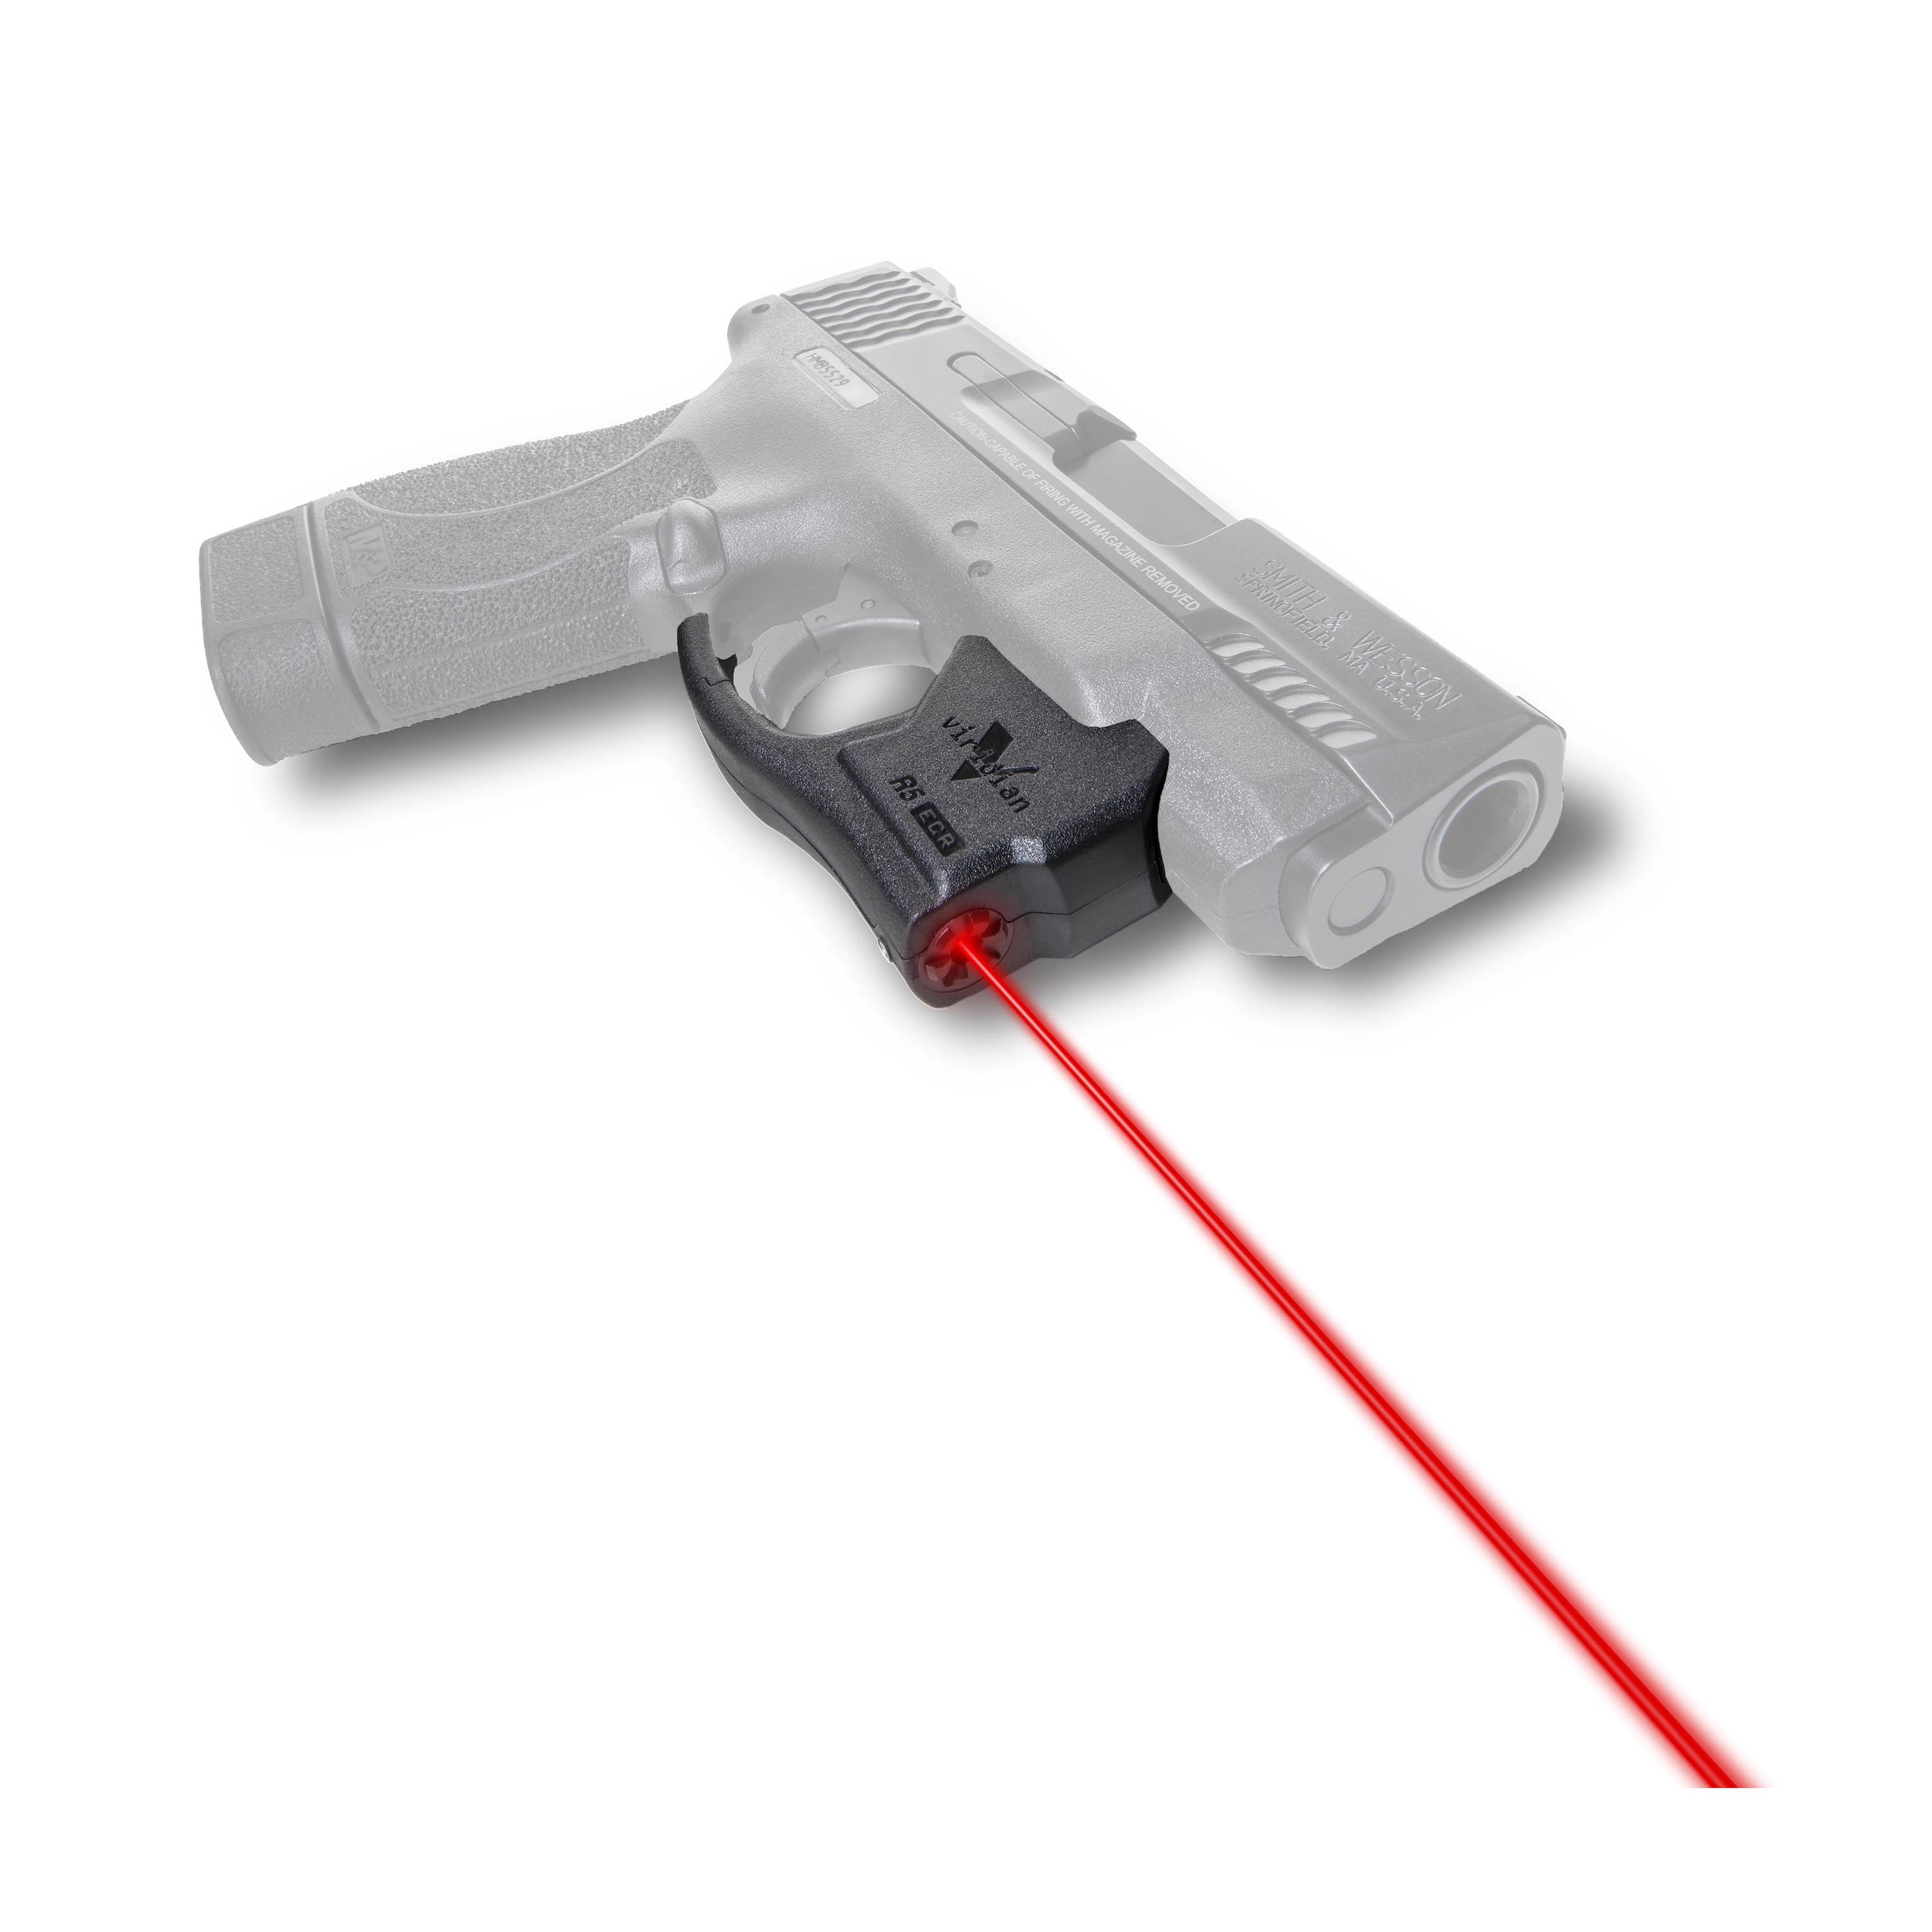 Viridian Reactor 5 Red Laser Sight for Pistols and Handguns with Tactical Red Laser and ECR Instant On Technology Holster 